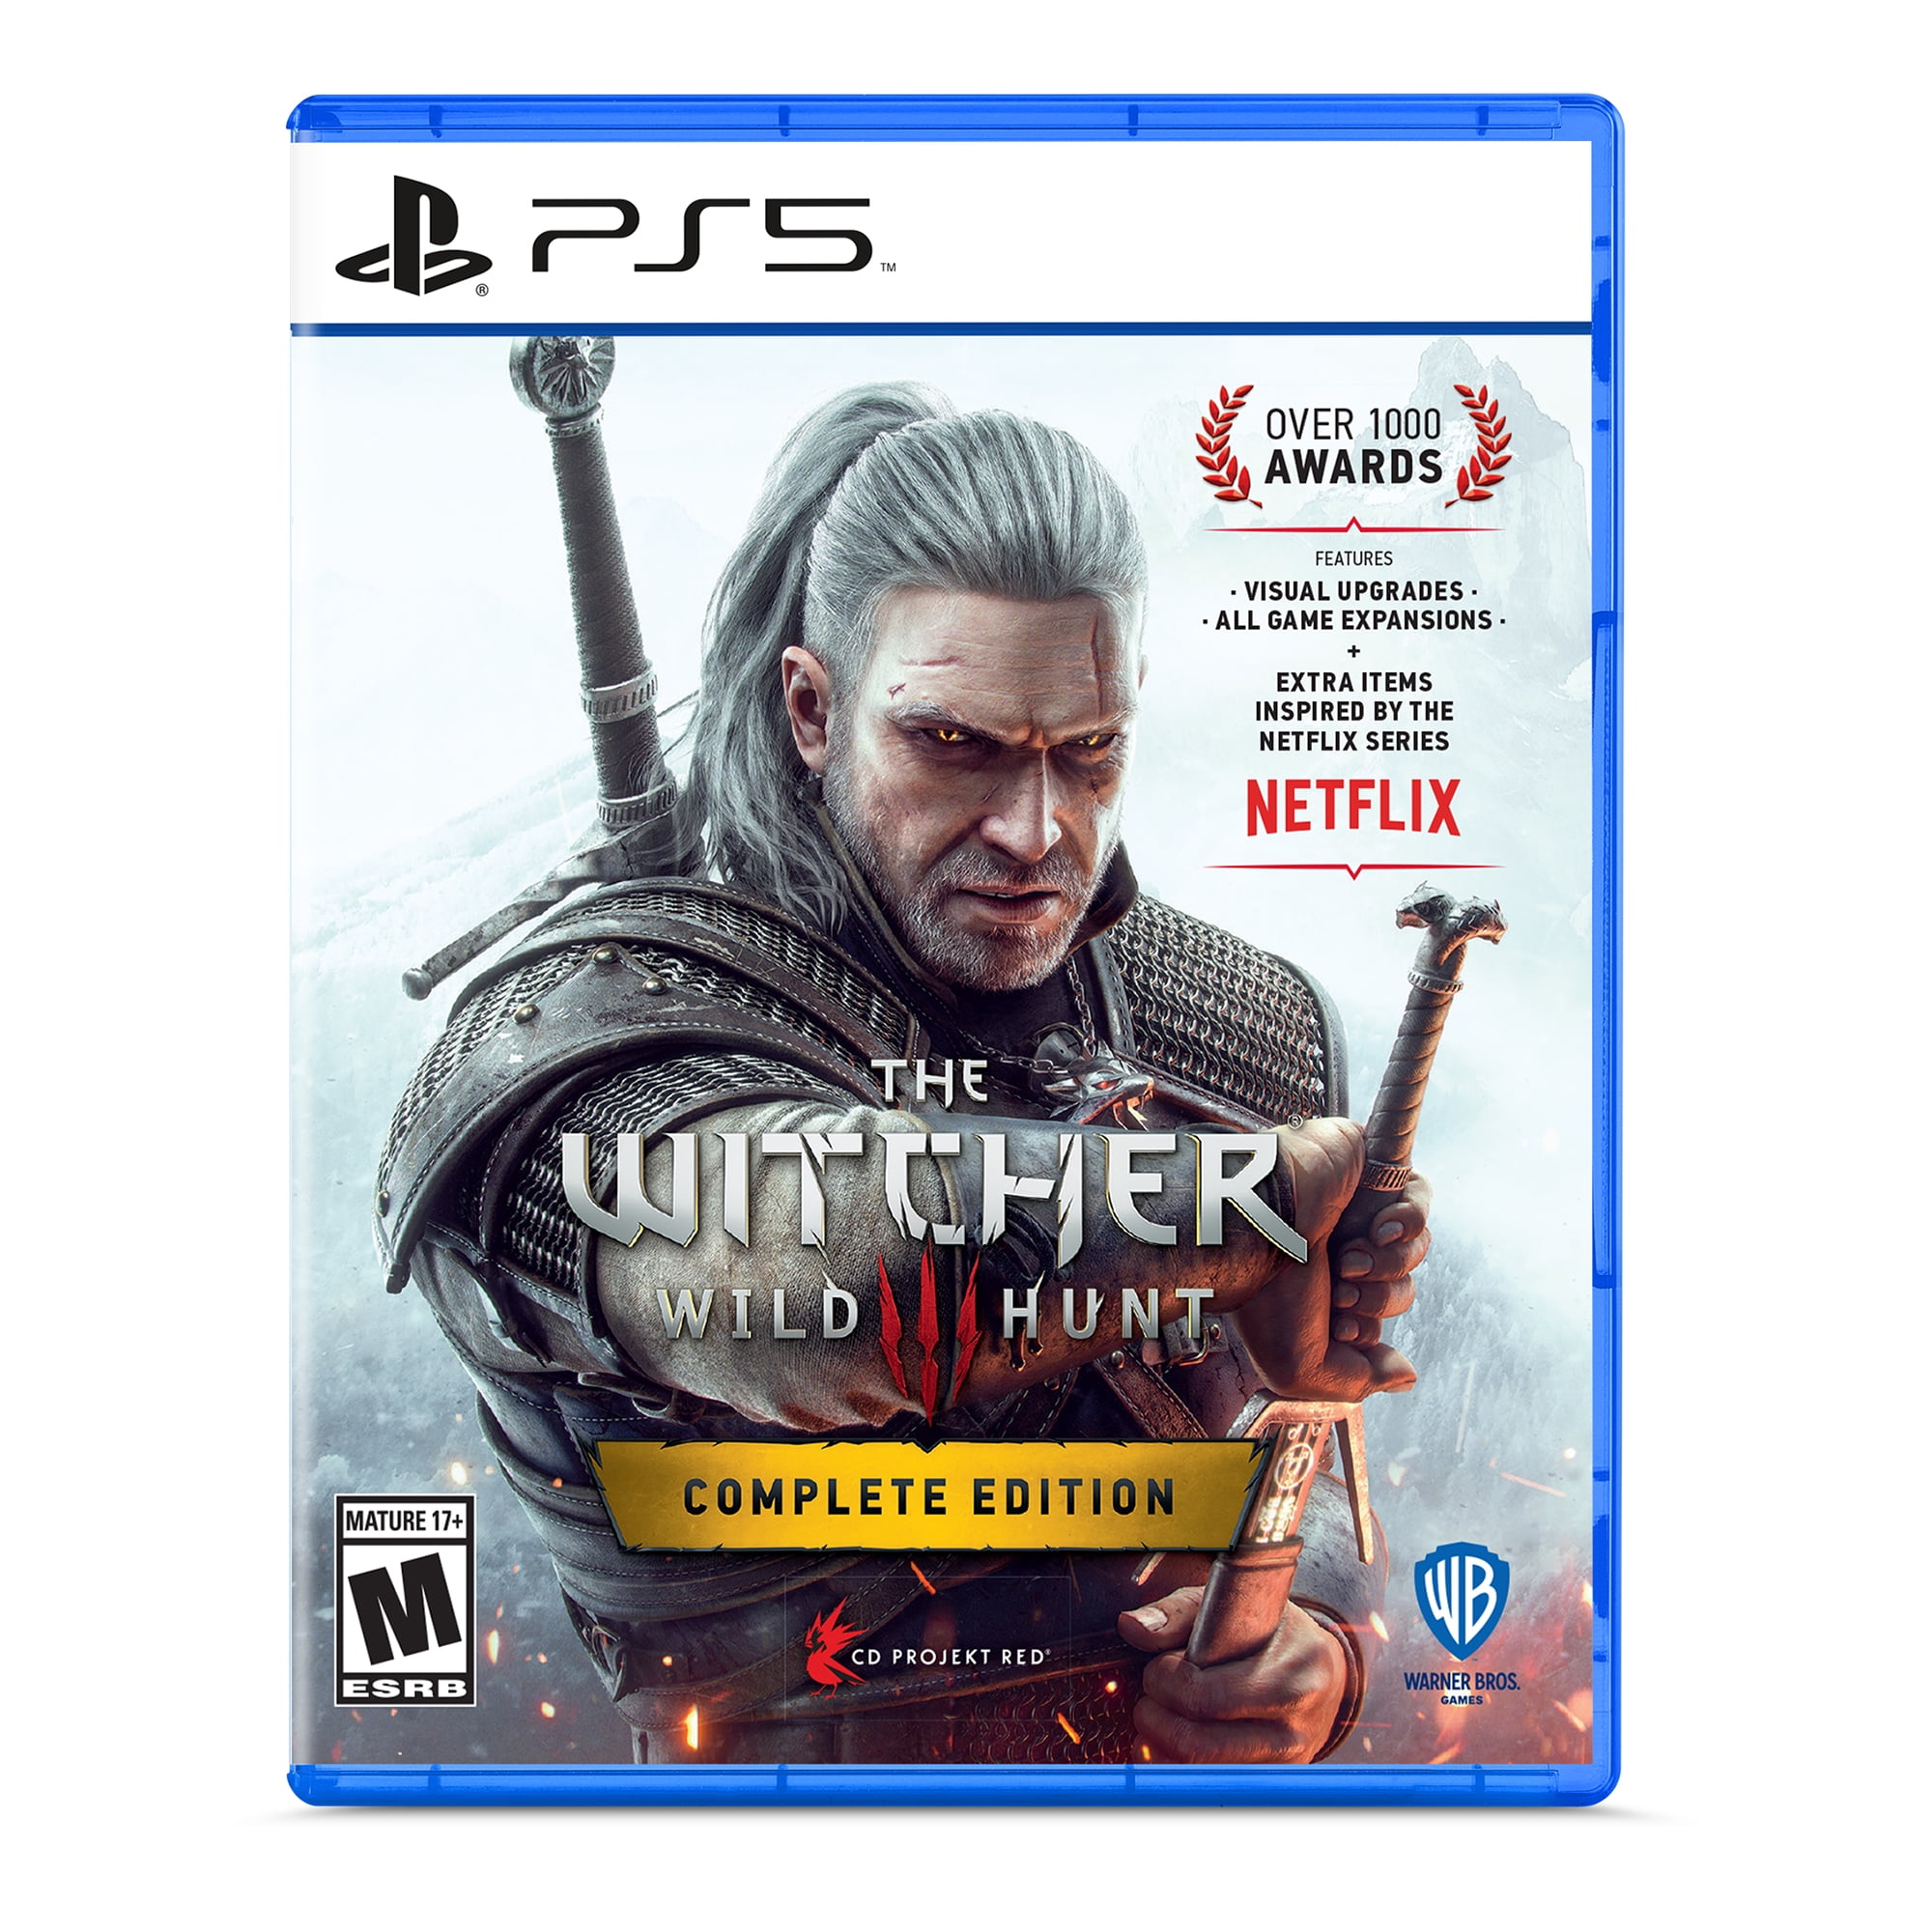 The Witcher 3: Wild Hunt - Complete Edition (PS5 & XSX) $20 at Walmart